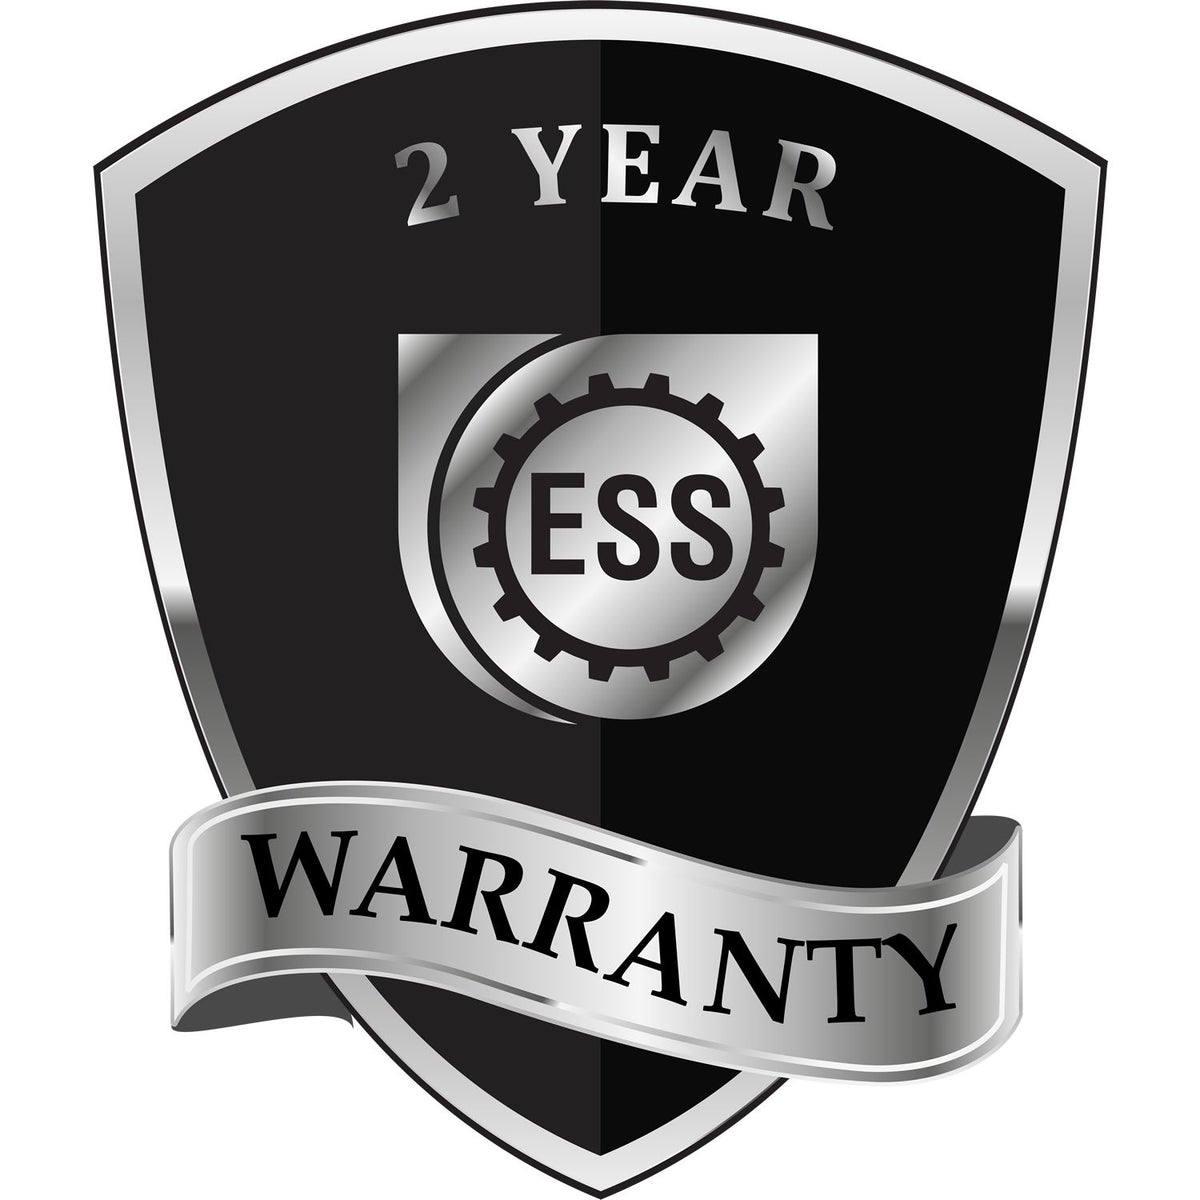 A black and silver badge or emblem showing warranty information for the Hybrid Maine Engineer Seal